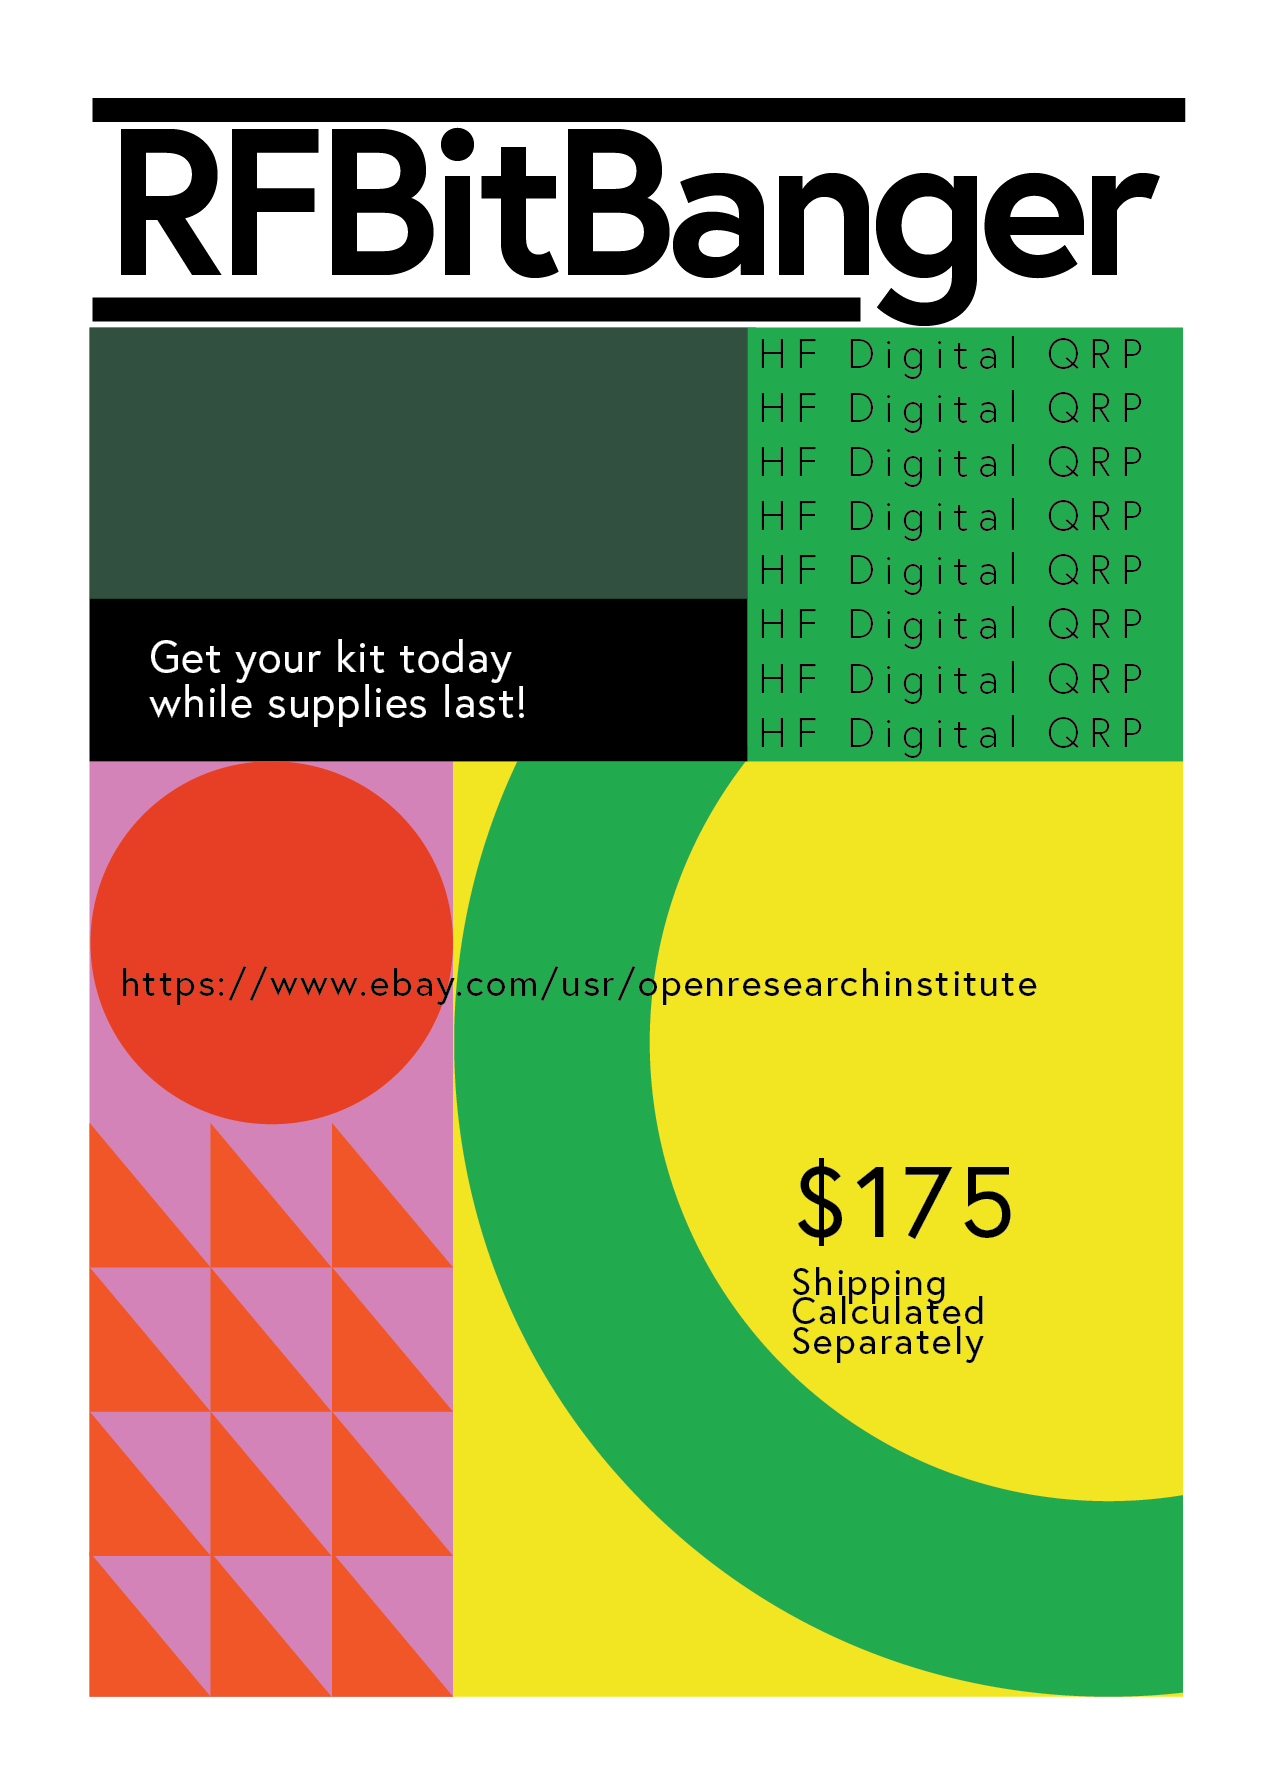 RFBitBanger poster, in 1970s style with green, yellow, pink, and red geometric shapes.